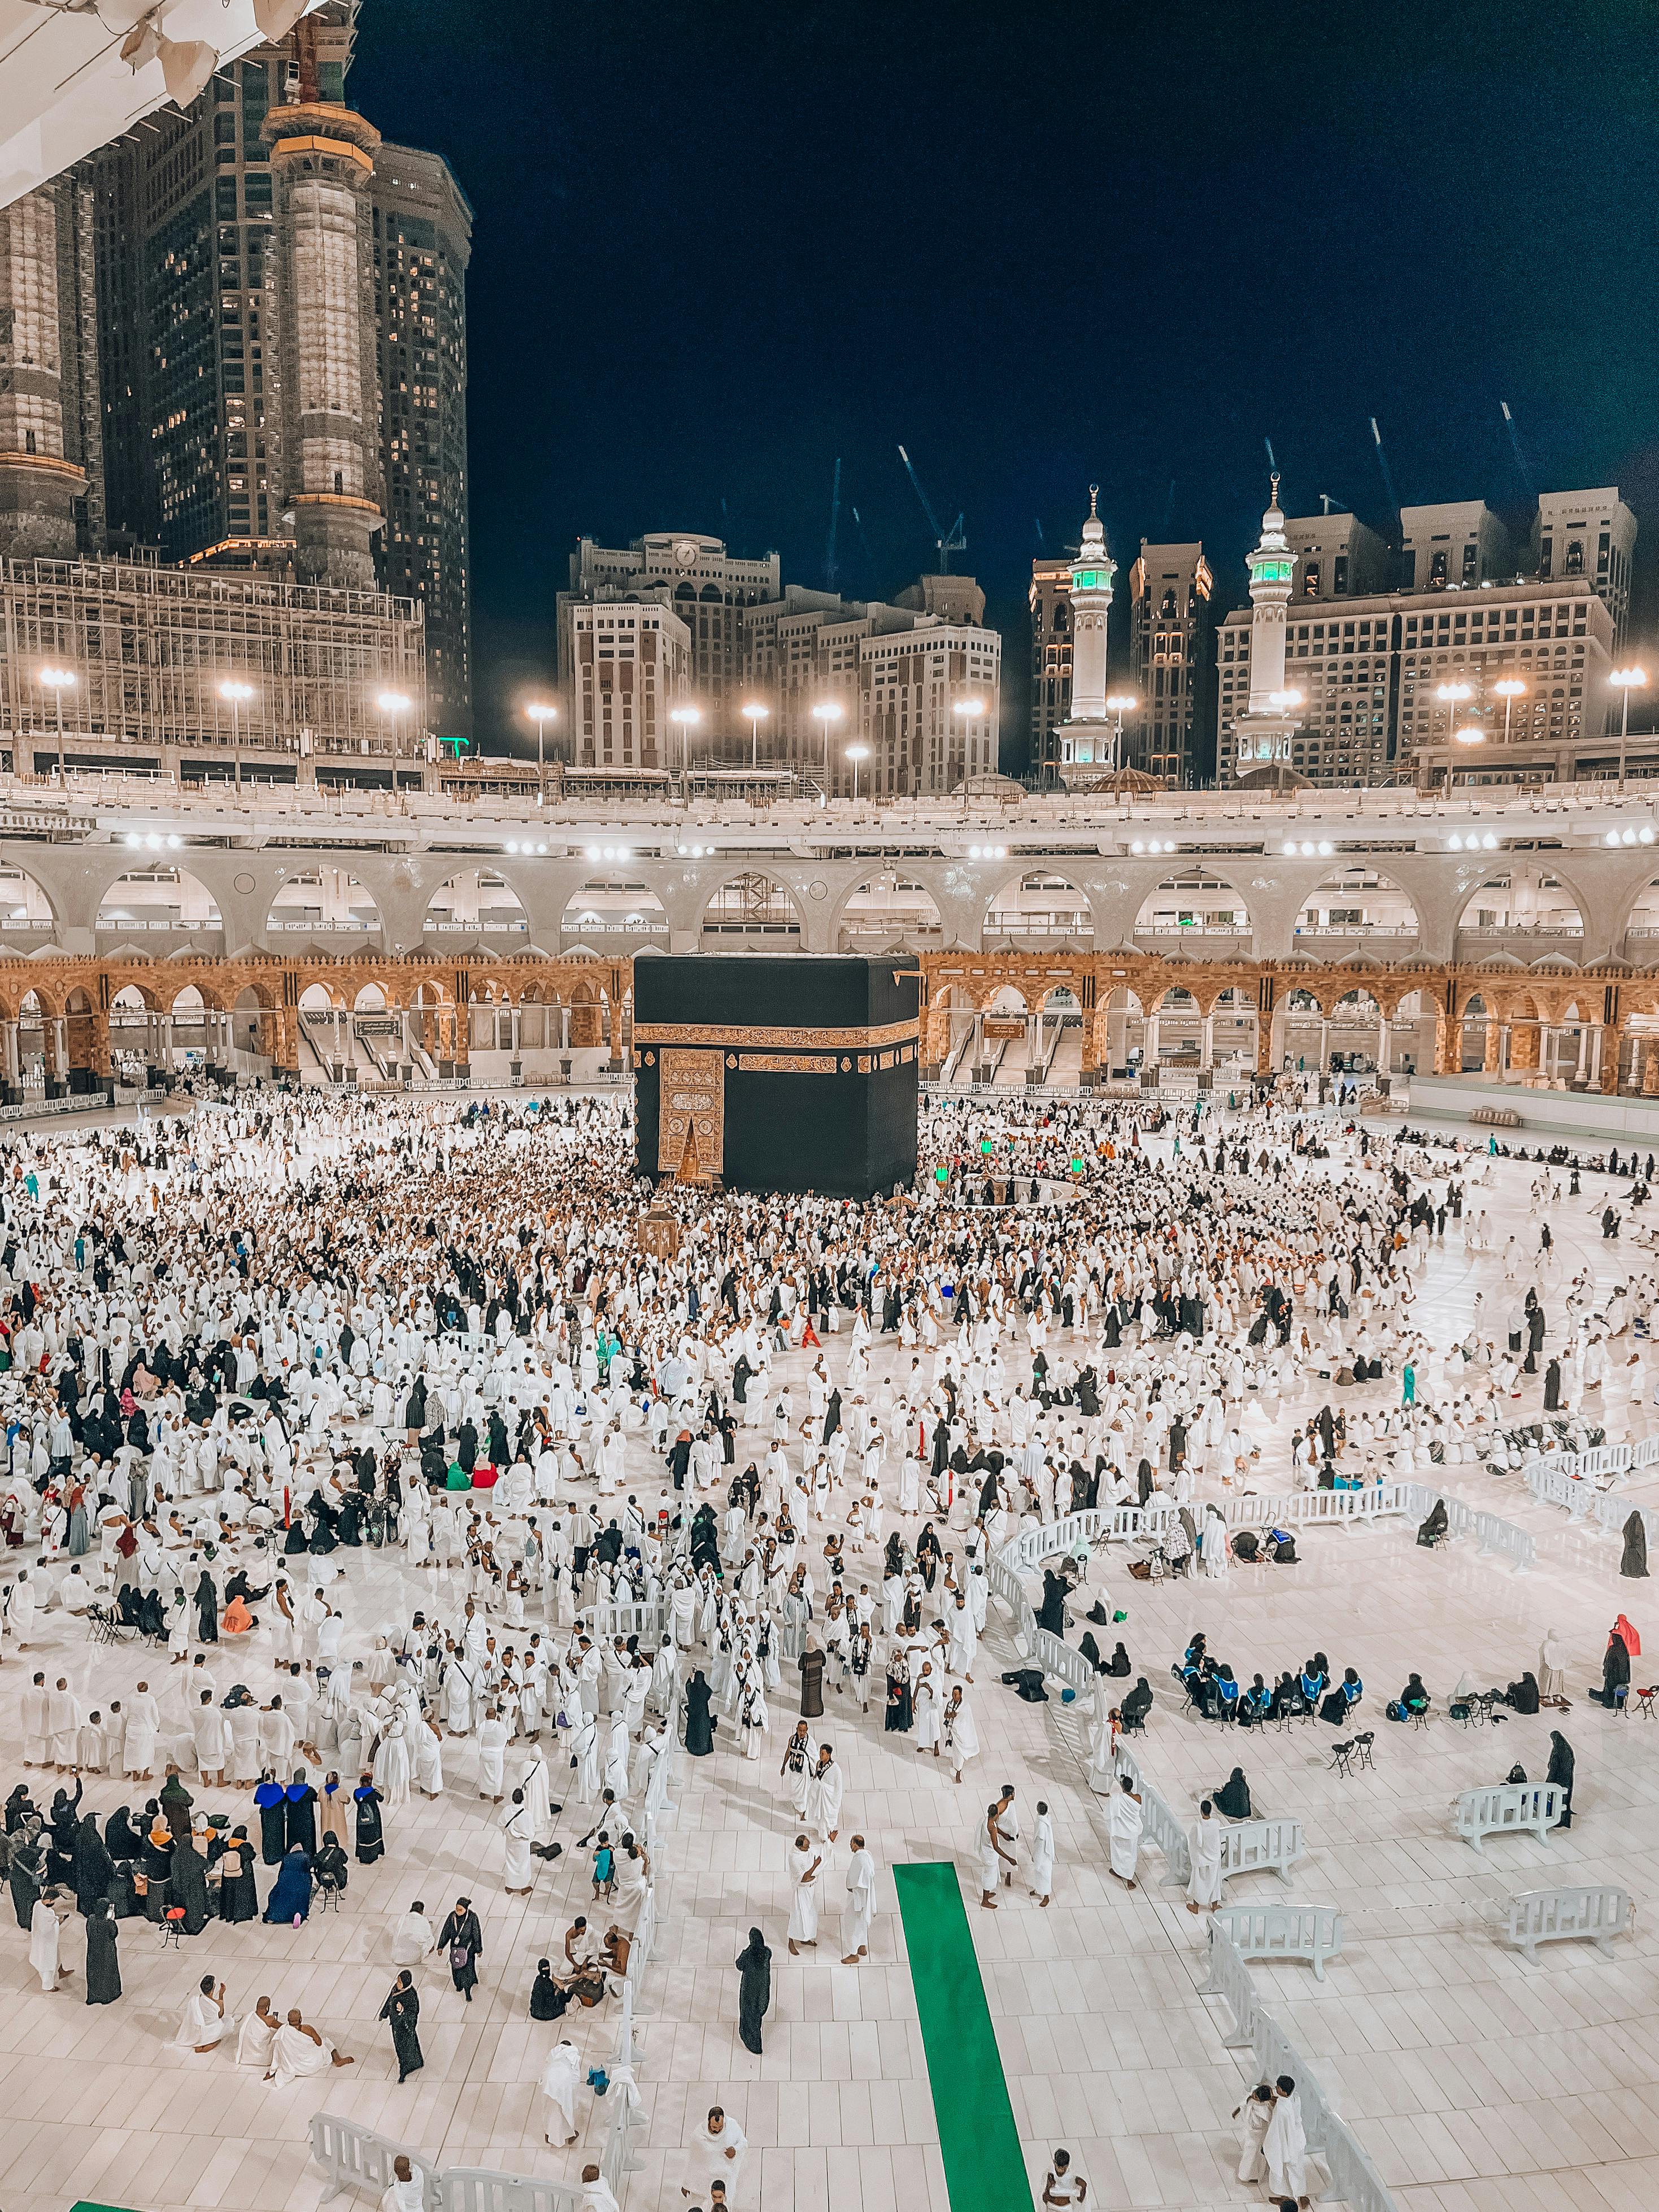 HD wallpaper Masjid Al Haram Or Holy Mosque Great Mosque In Mecca Is The  Largest Mosque In The World And Surrounds The Holiest Site Of Islam The  Kaaba In Mecca City Saudi